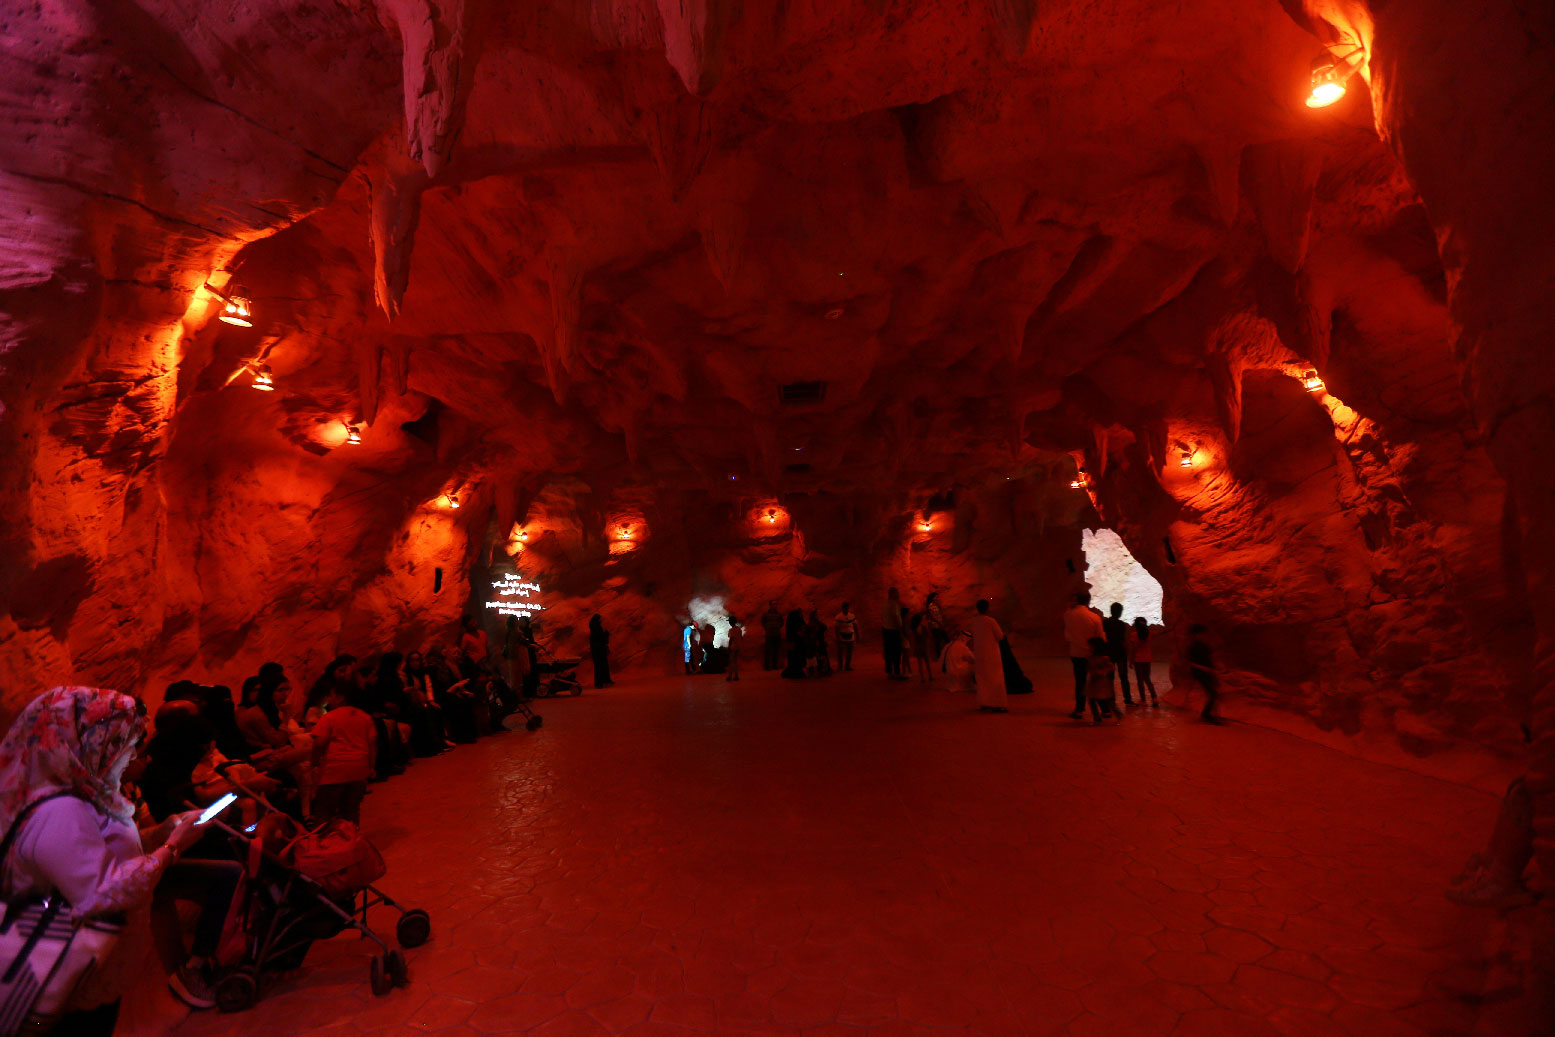 Visitors are seen inside the Cave of Miracles, part of Dubai's Quranic Park in Dubai, UAE April 6, 2019.